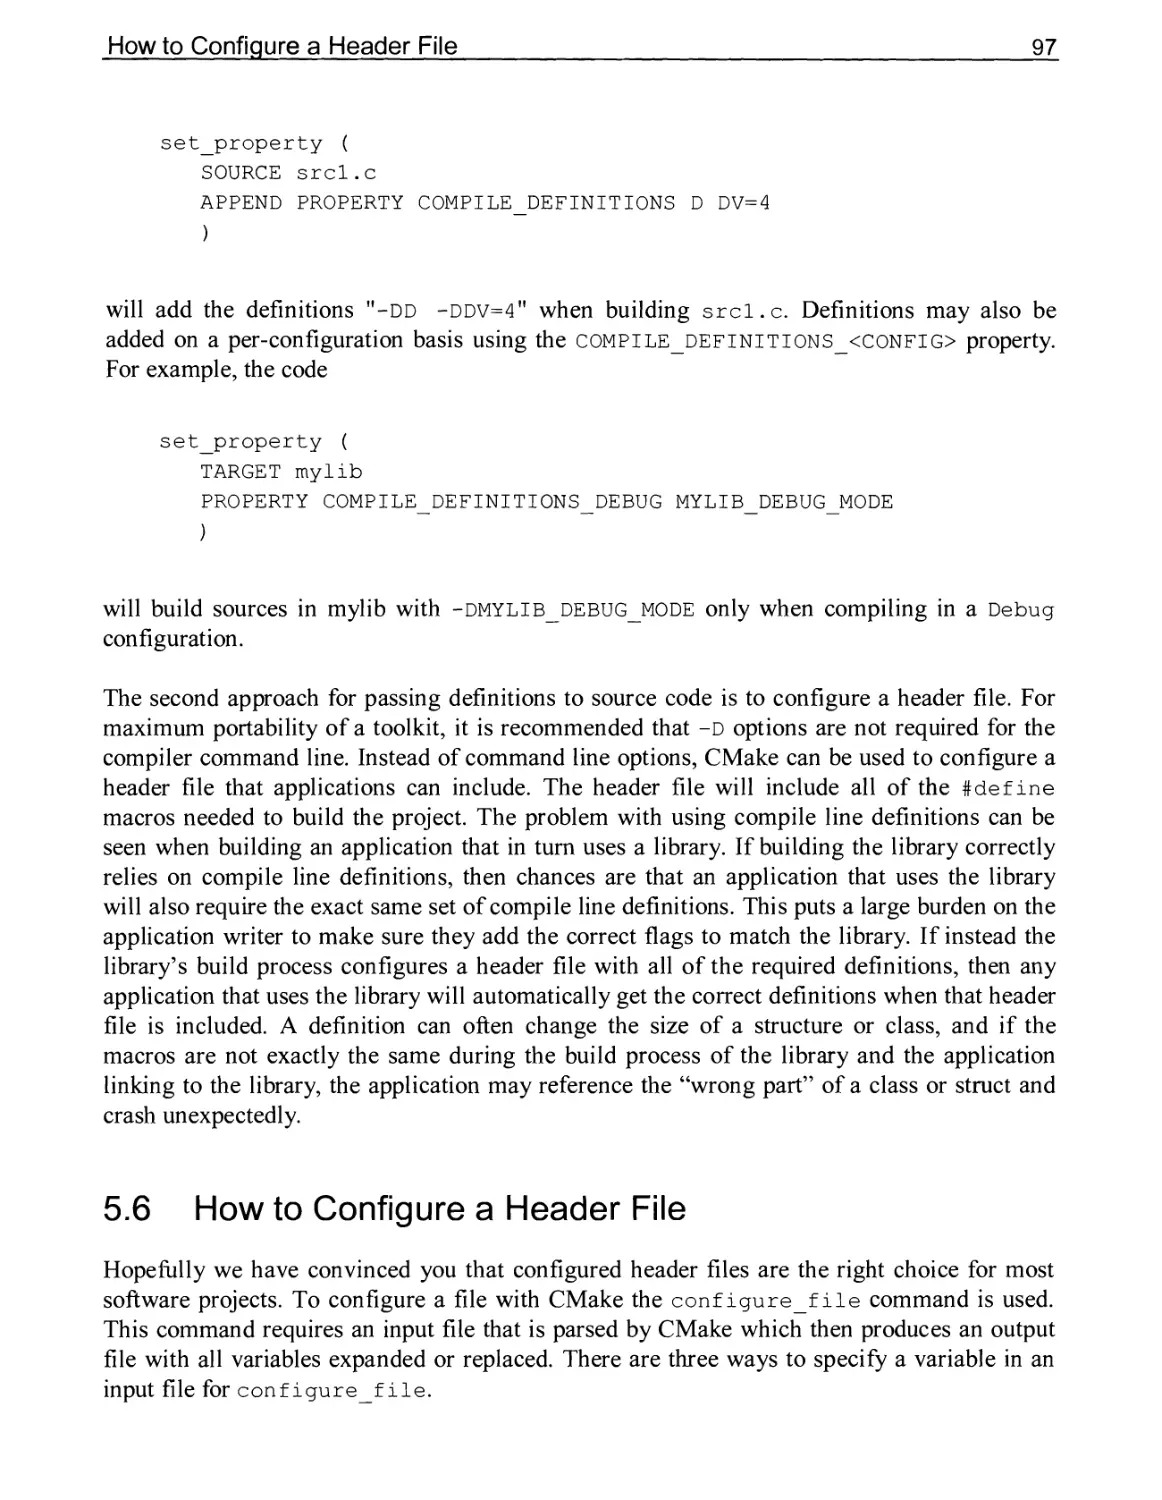 5.6 How to Configure a Header File